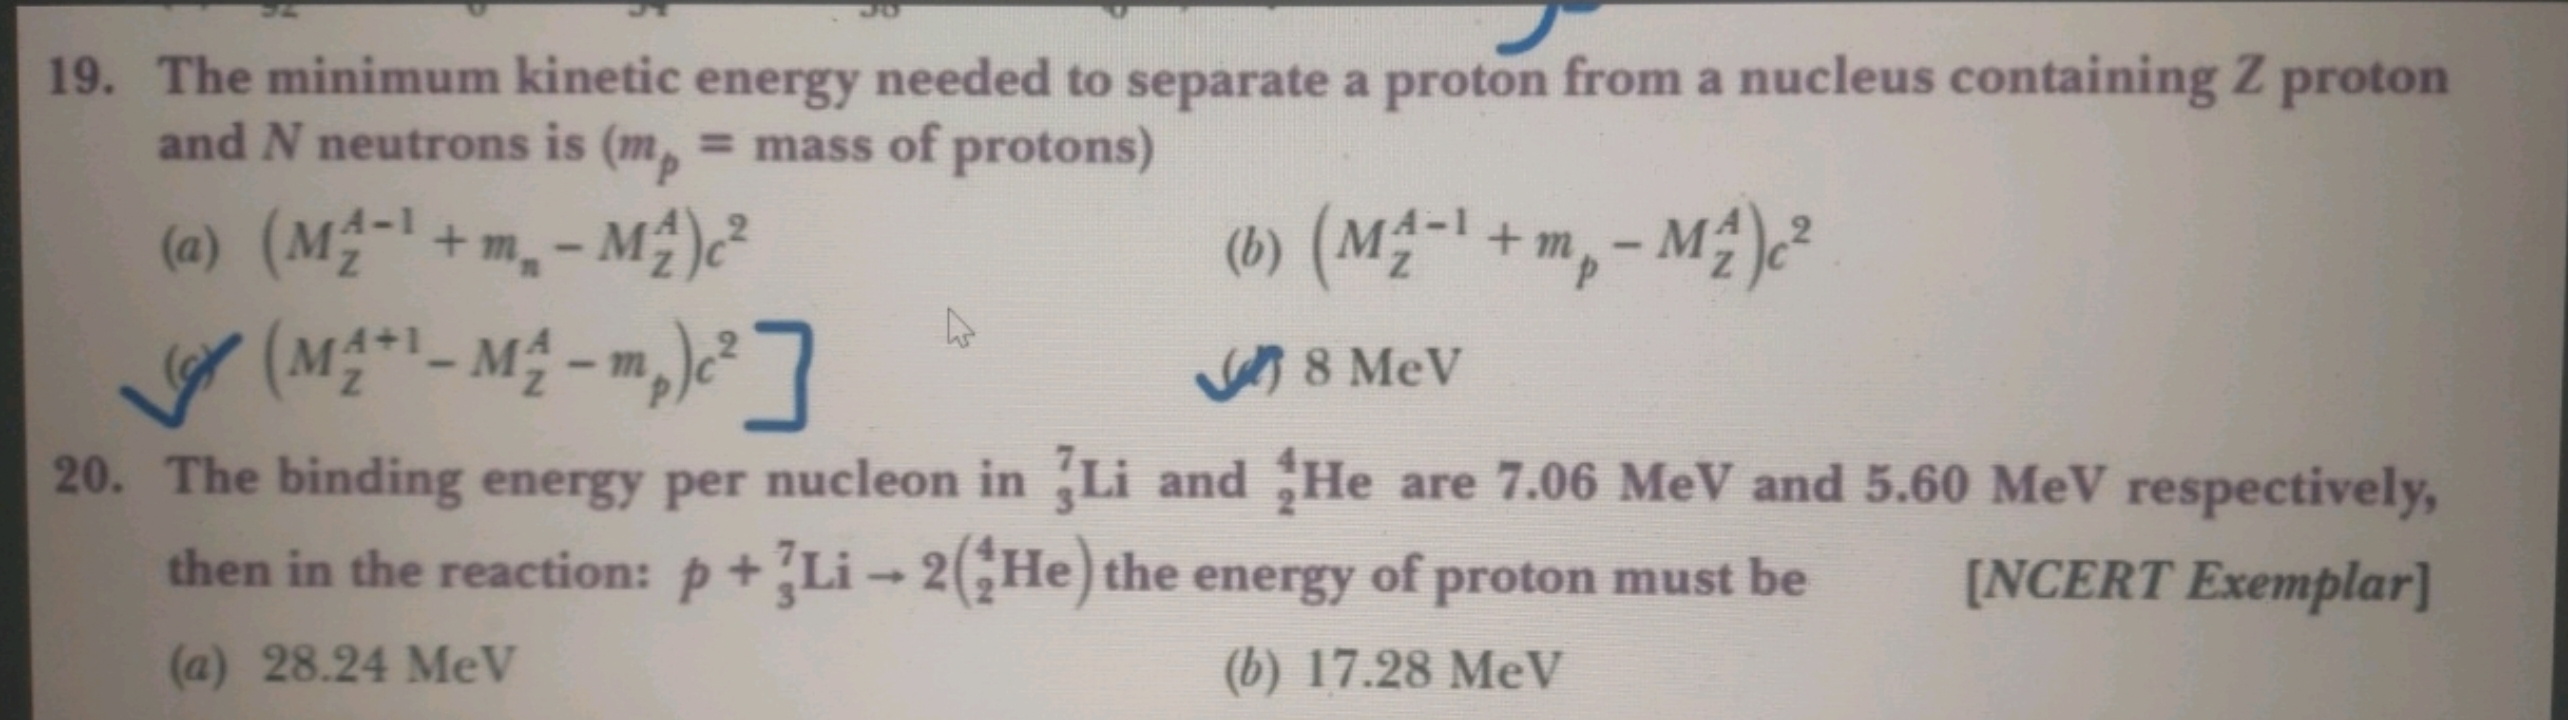 19. The minimum kinetic energy needed to separate a proton from a nucl